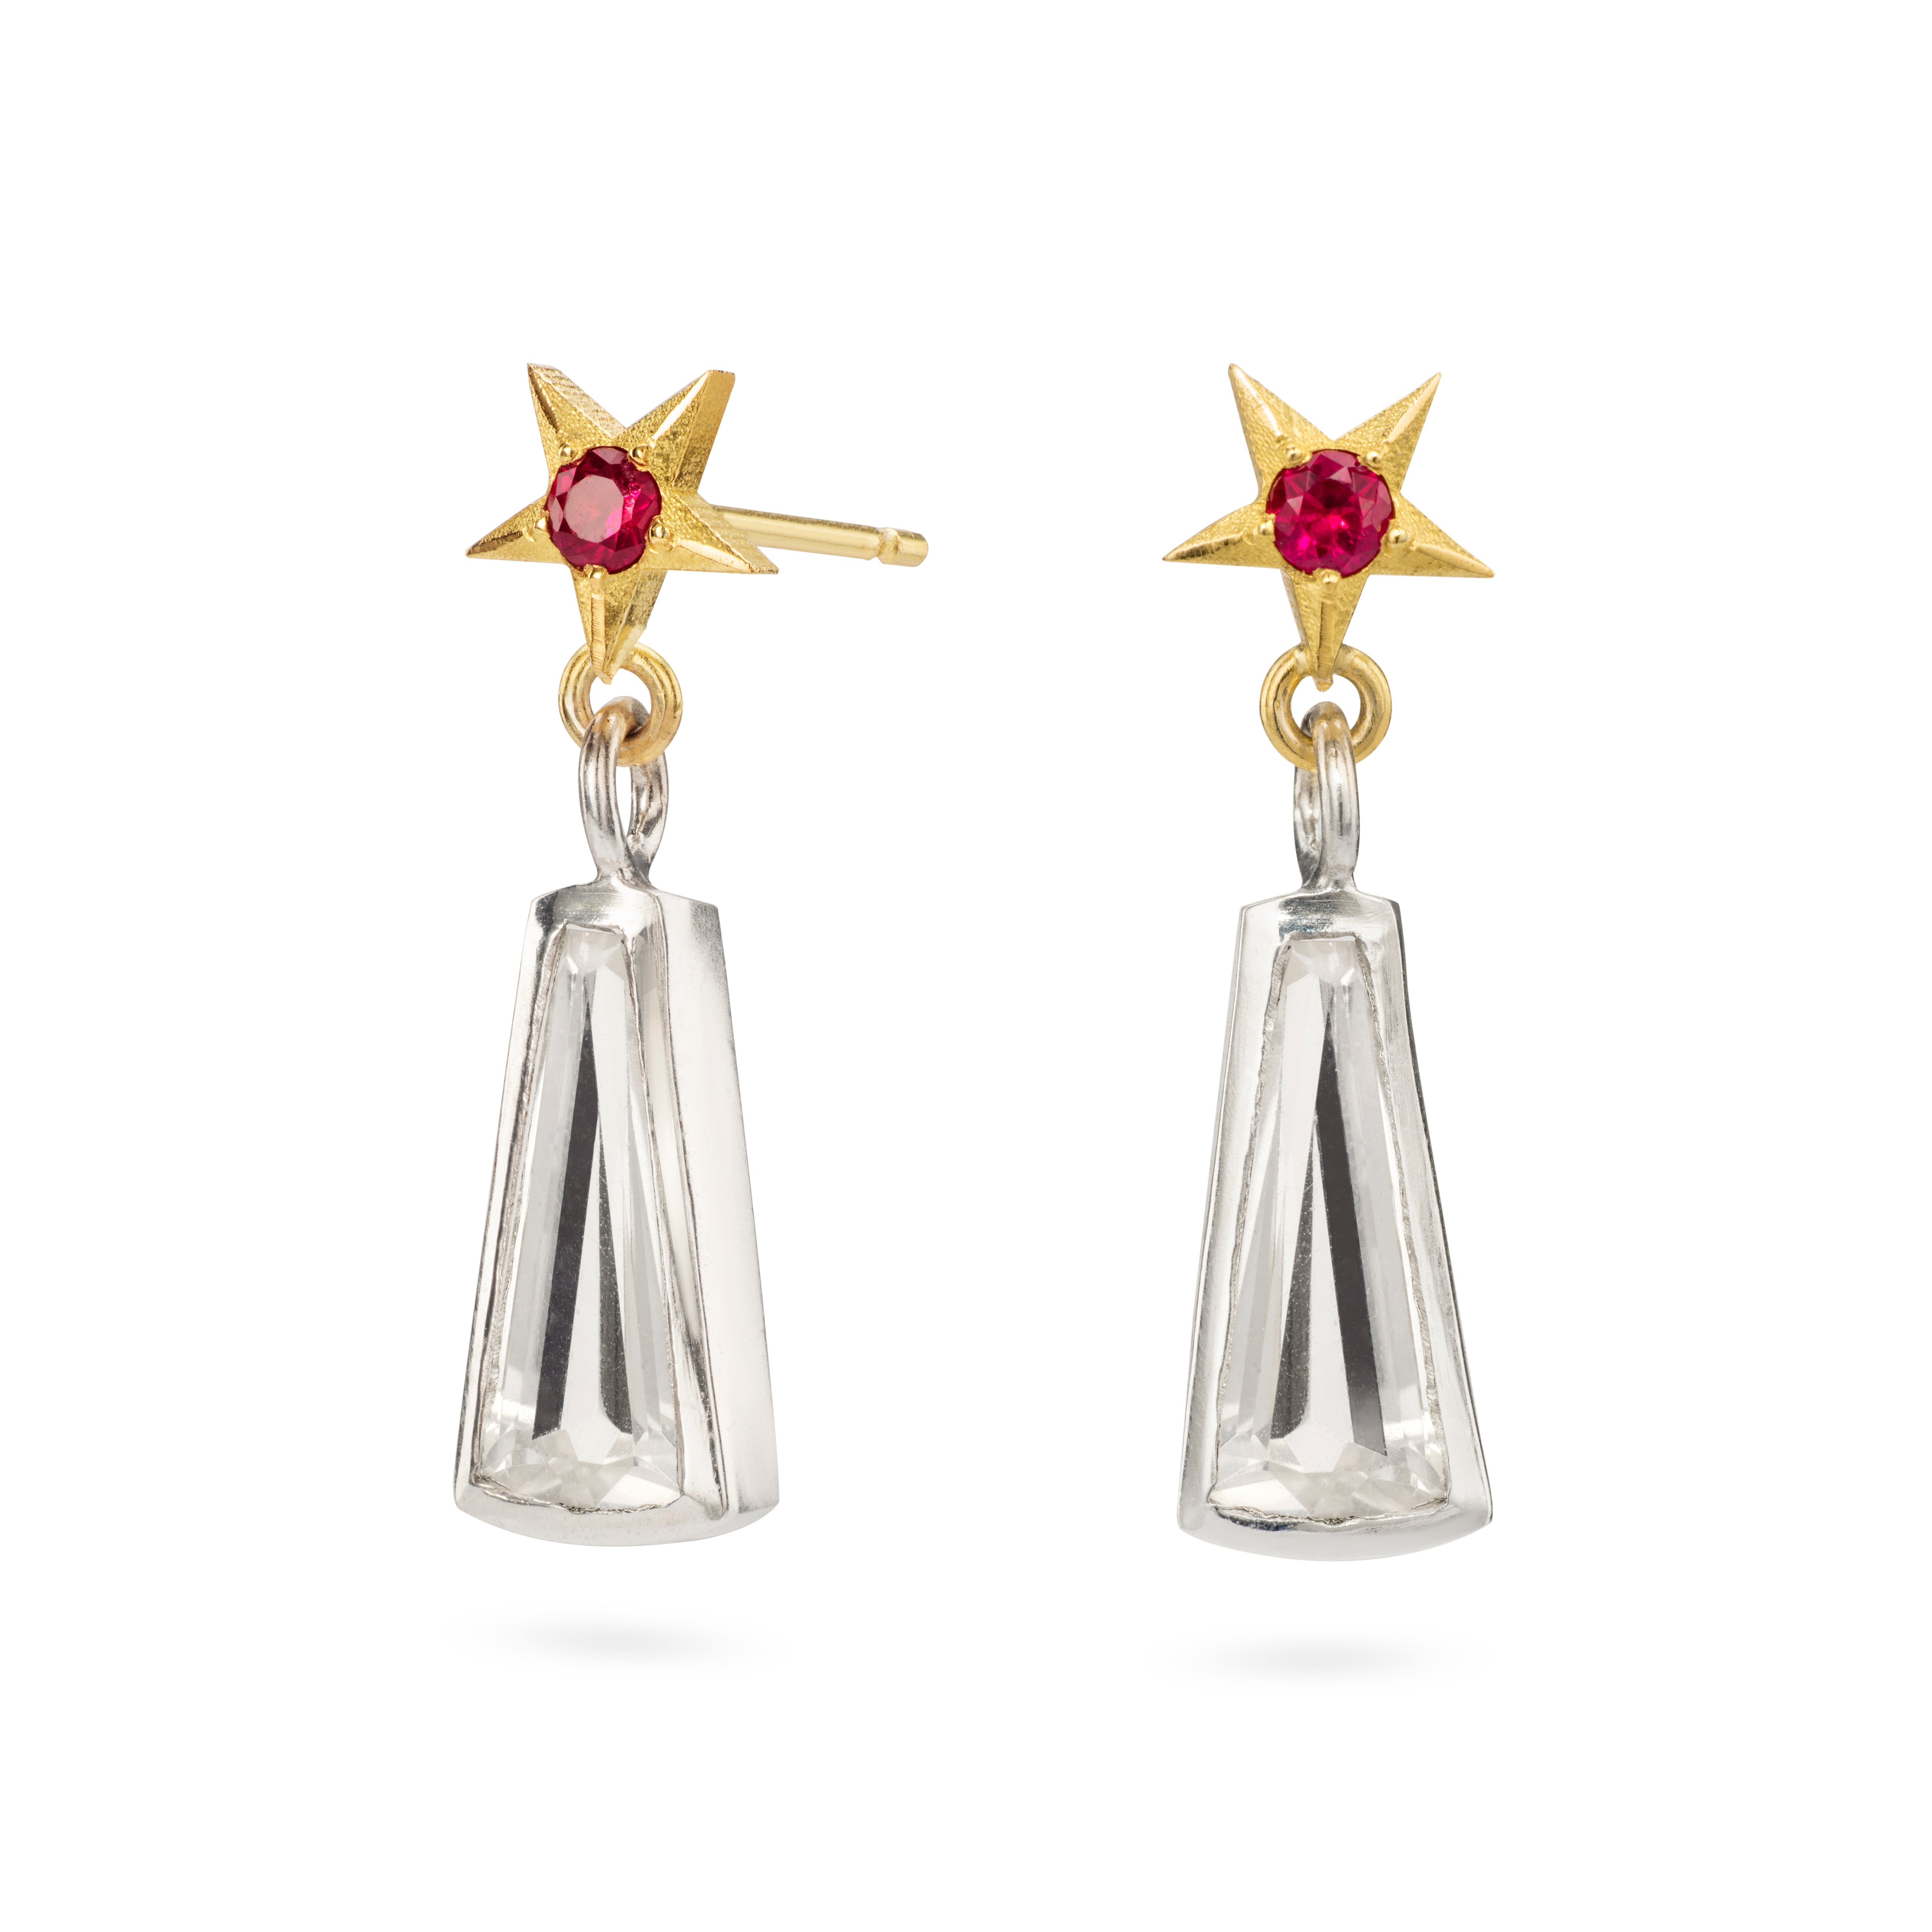 Stella 18ct Gold Star Studs with Ruby and Rose Quartz Drop